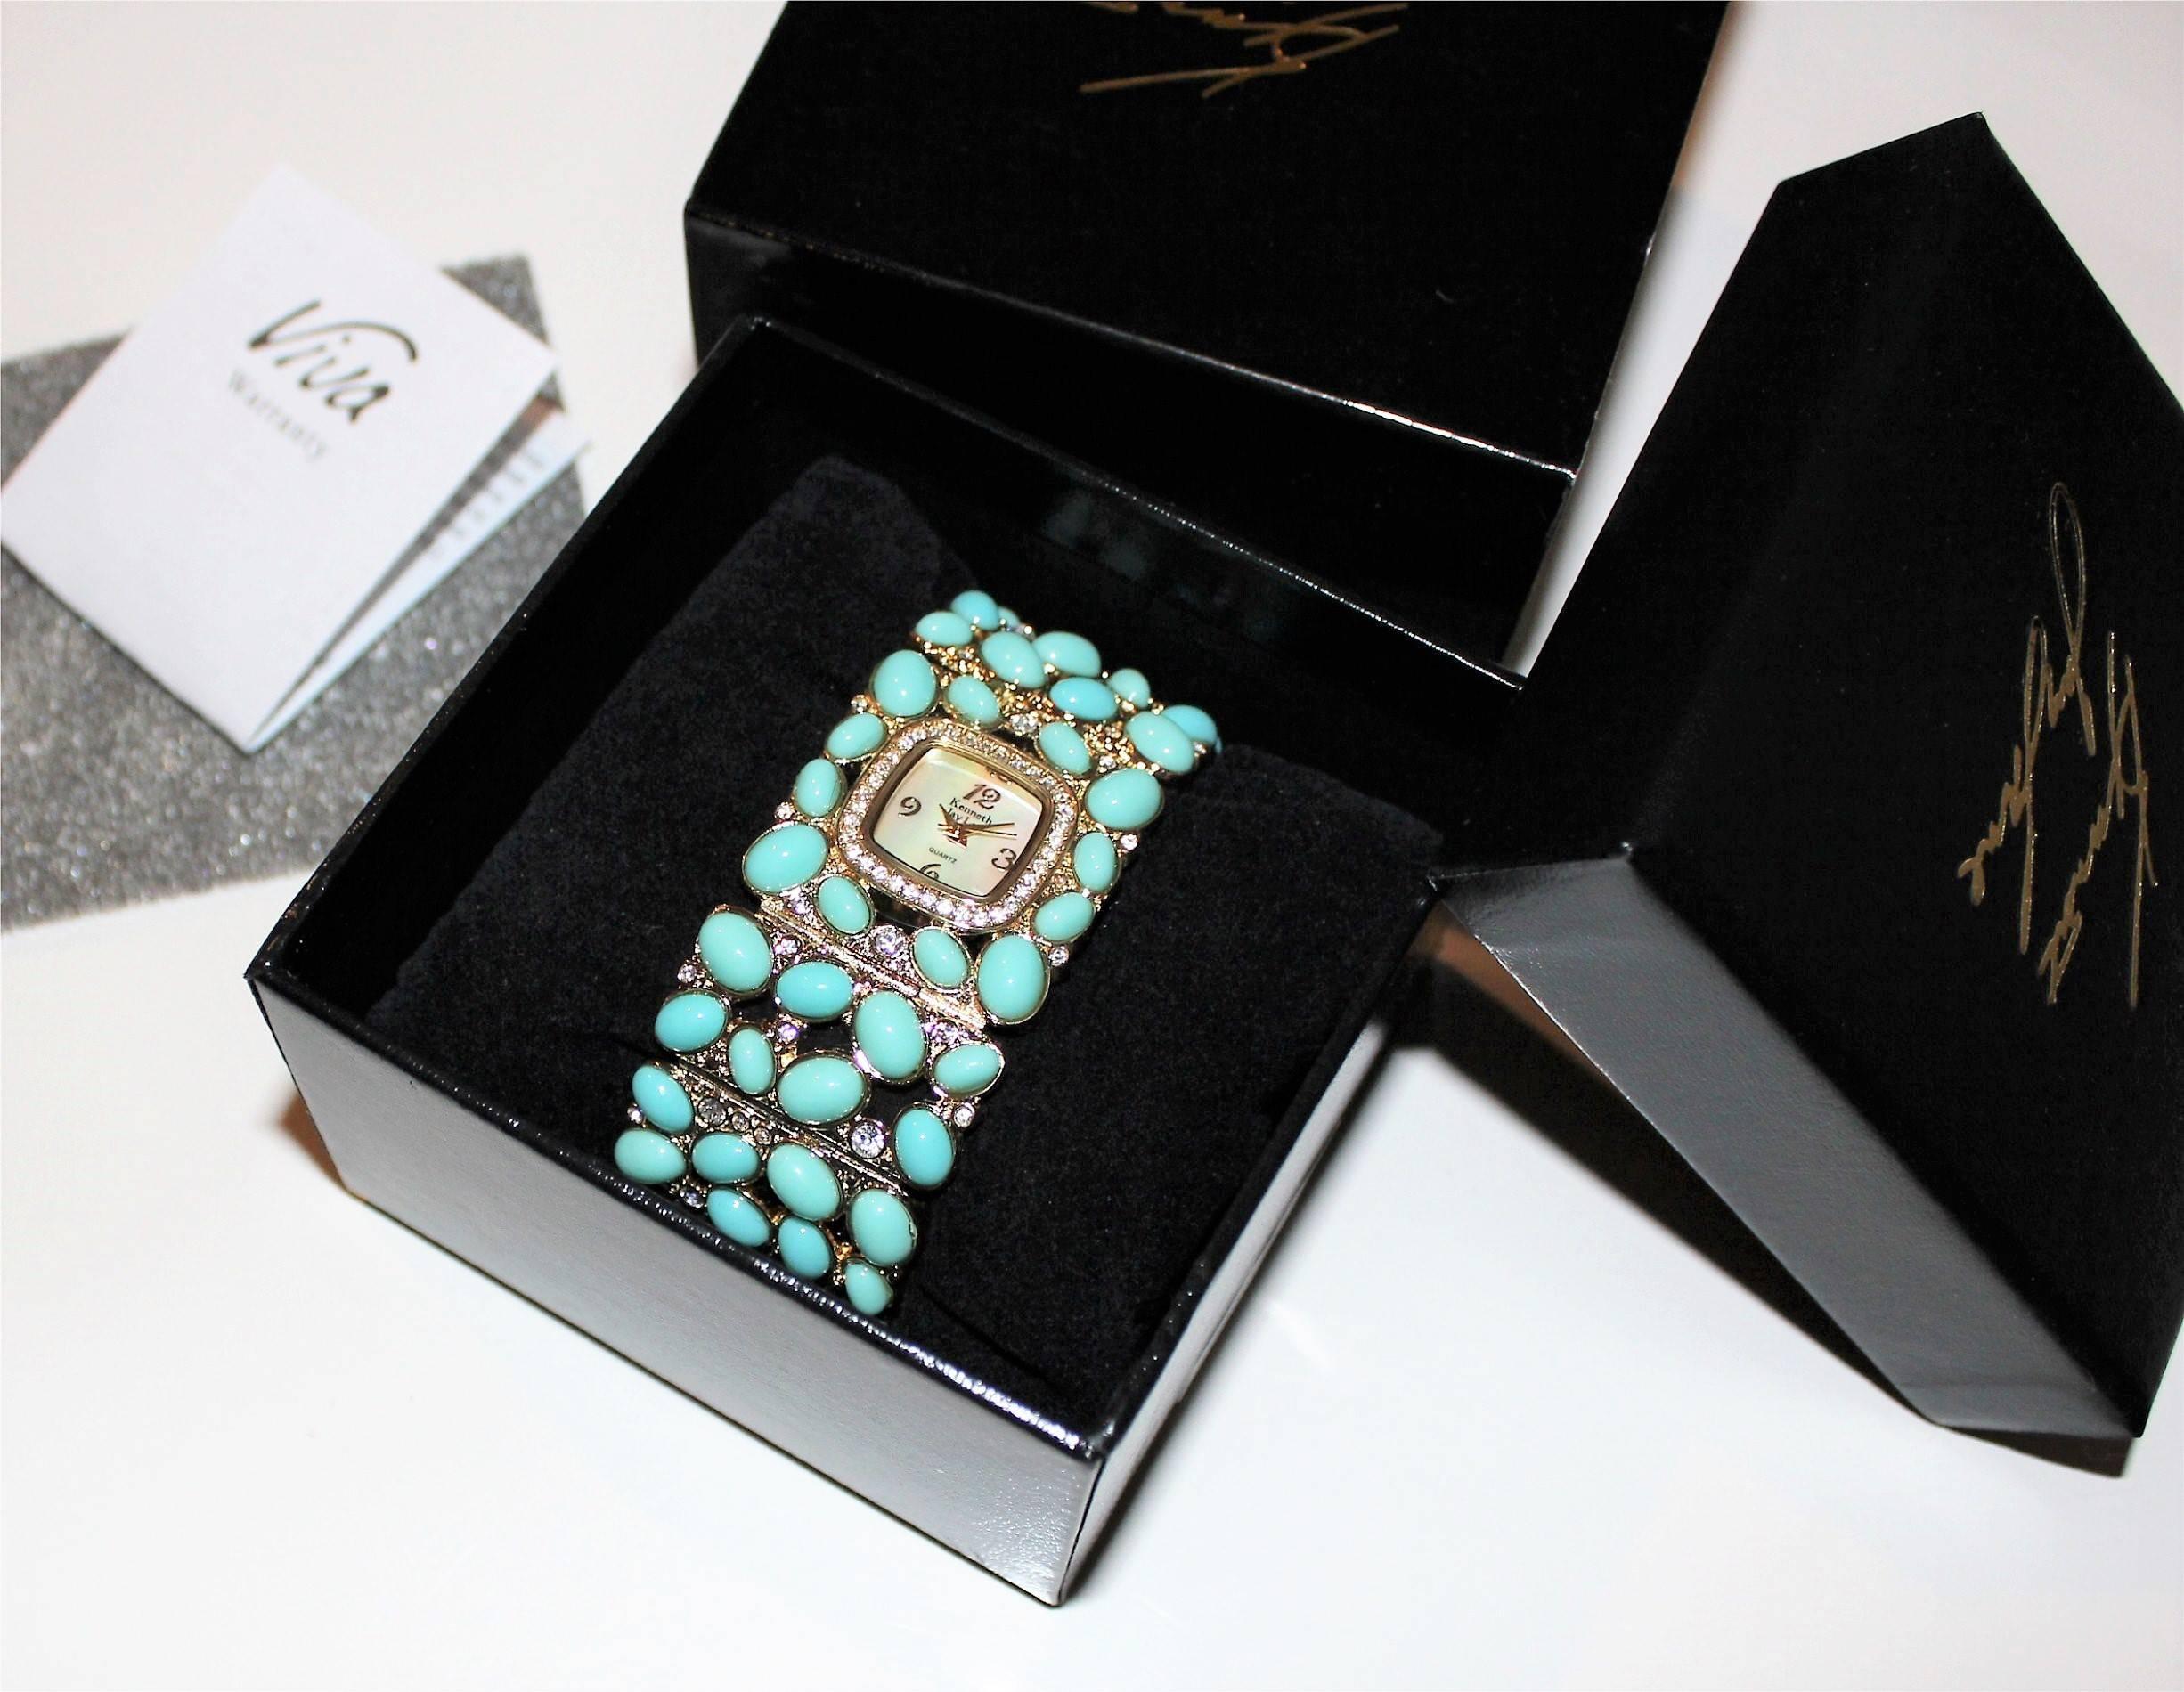 New Kenneth Jay Lane Turquoise Link Swarovski Crystal quartz Wristwatch   In New Condition For Sale In Leesburg, VA